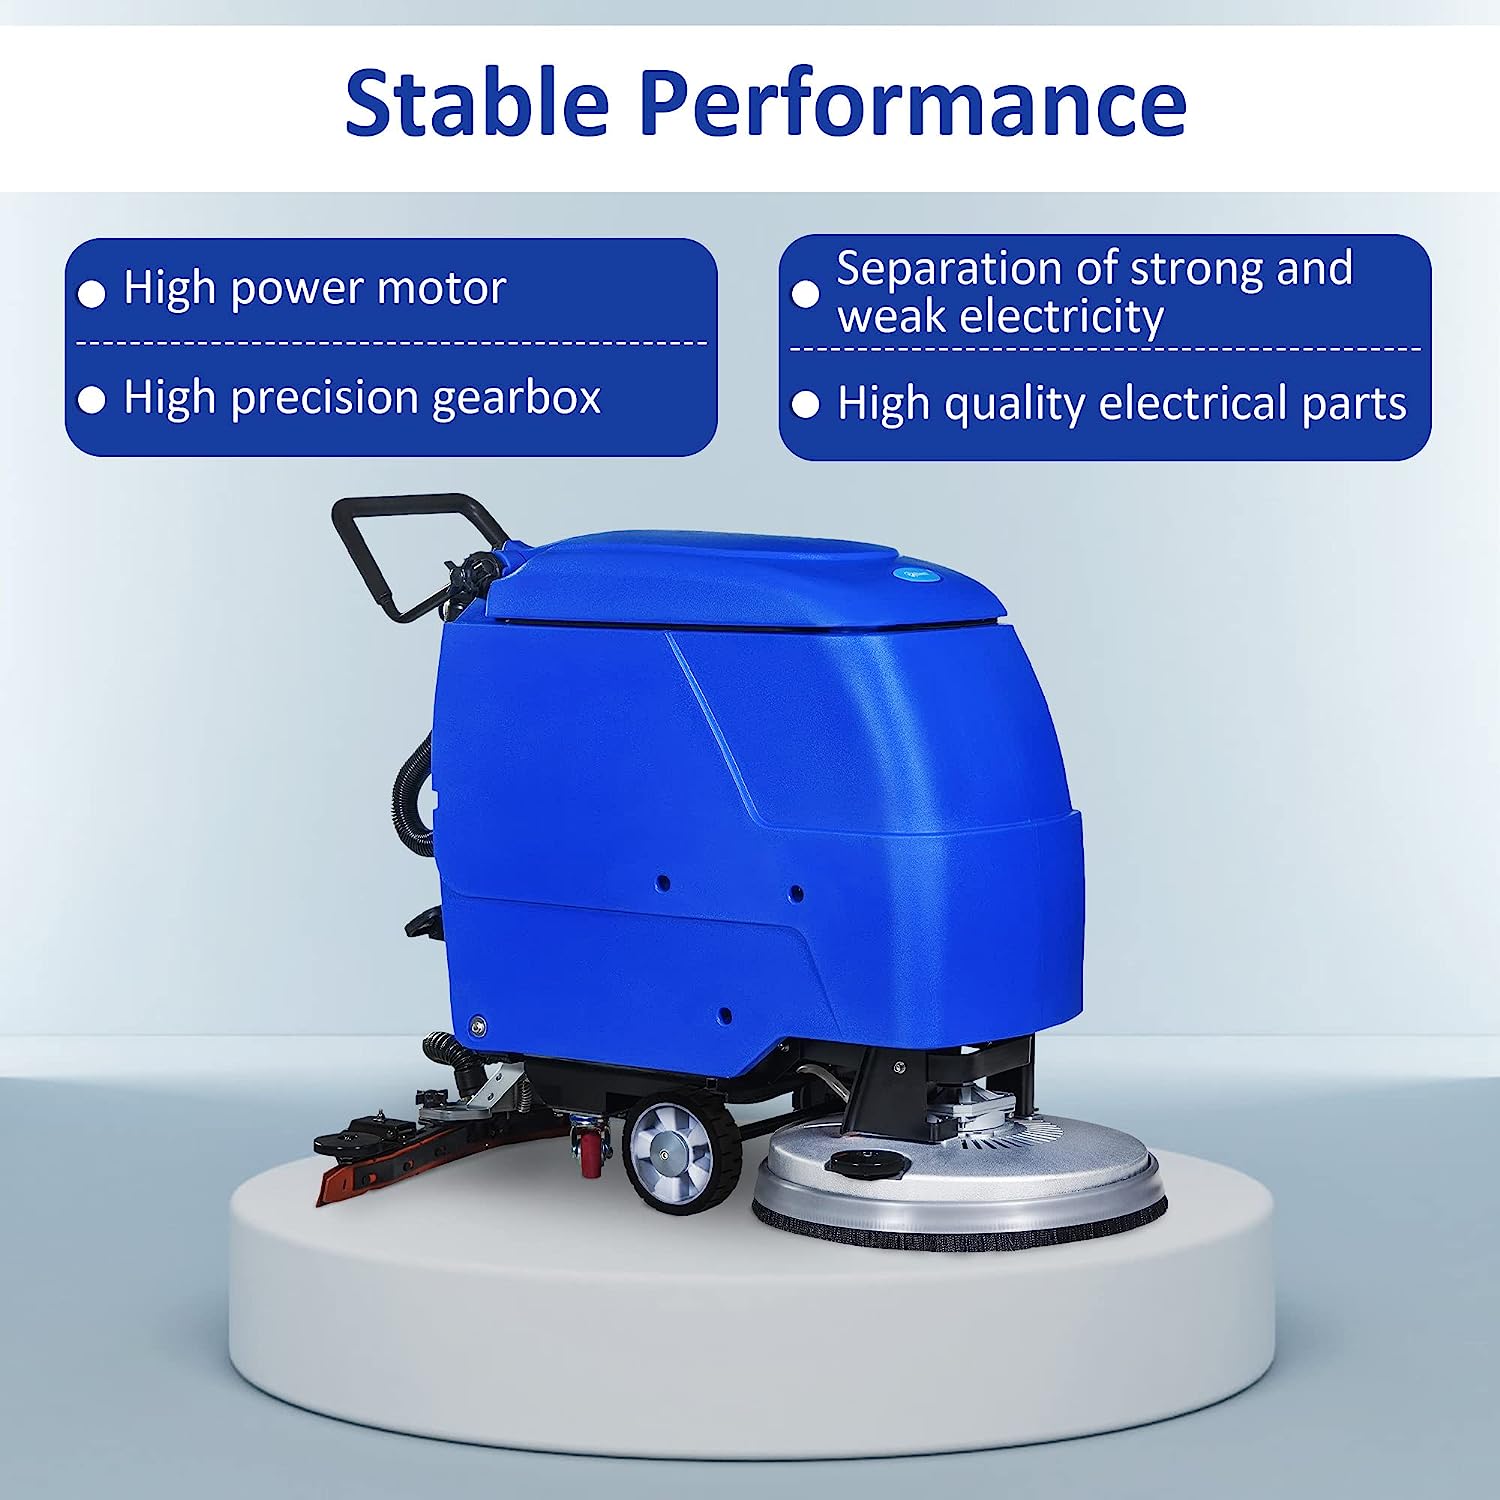 E-Macht Commercial Electric Floor Scrubber/ Dryer with Adjustable Handle with 20.8" Cleaning Path and 2 x 100amh Batteries for Efficient Cleaning